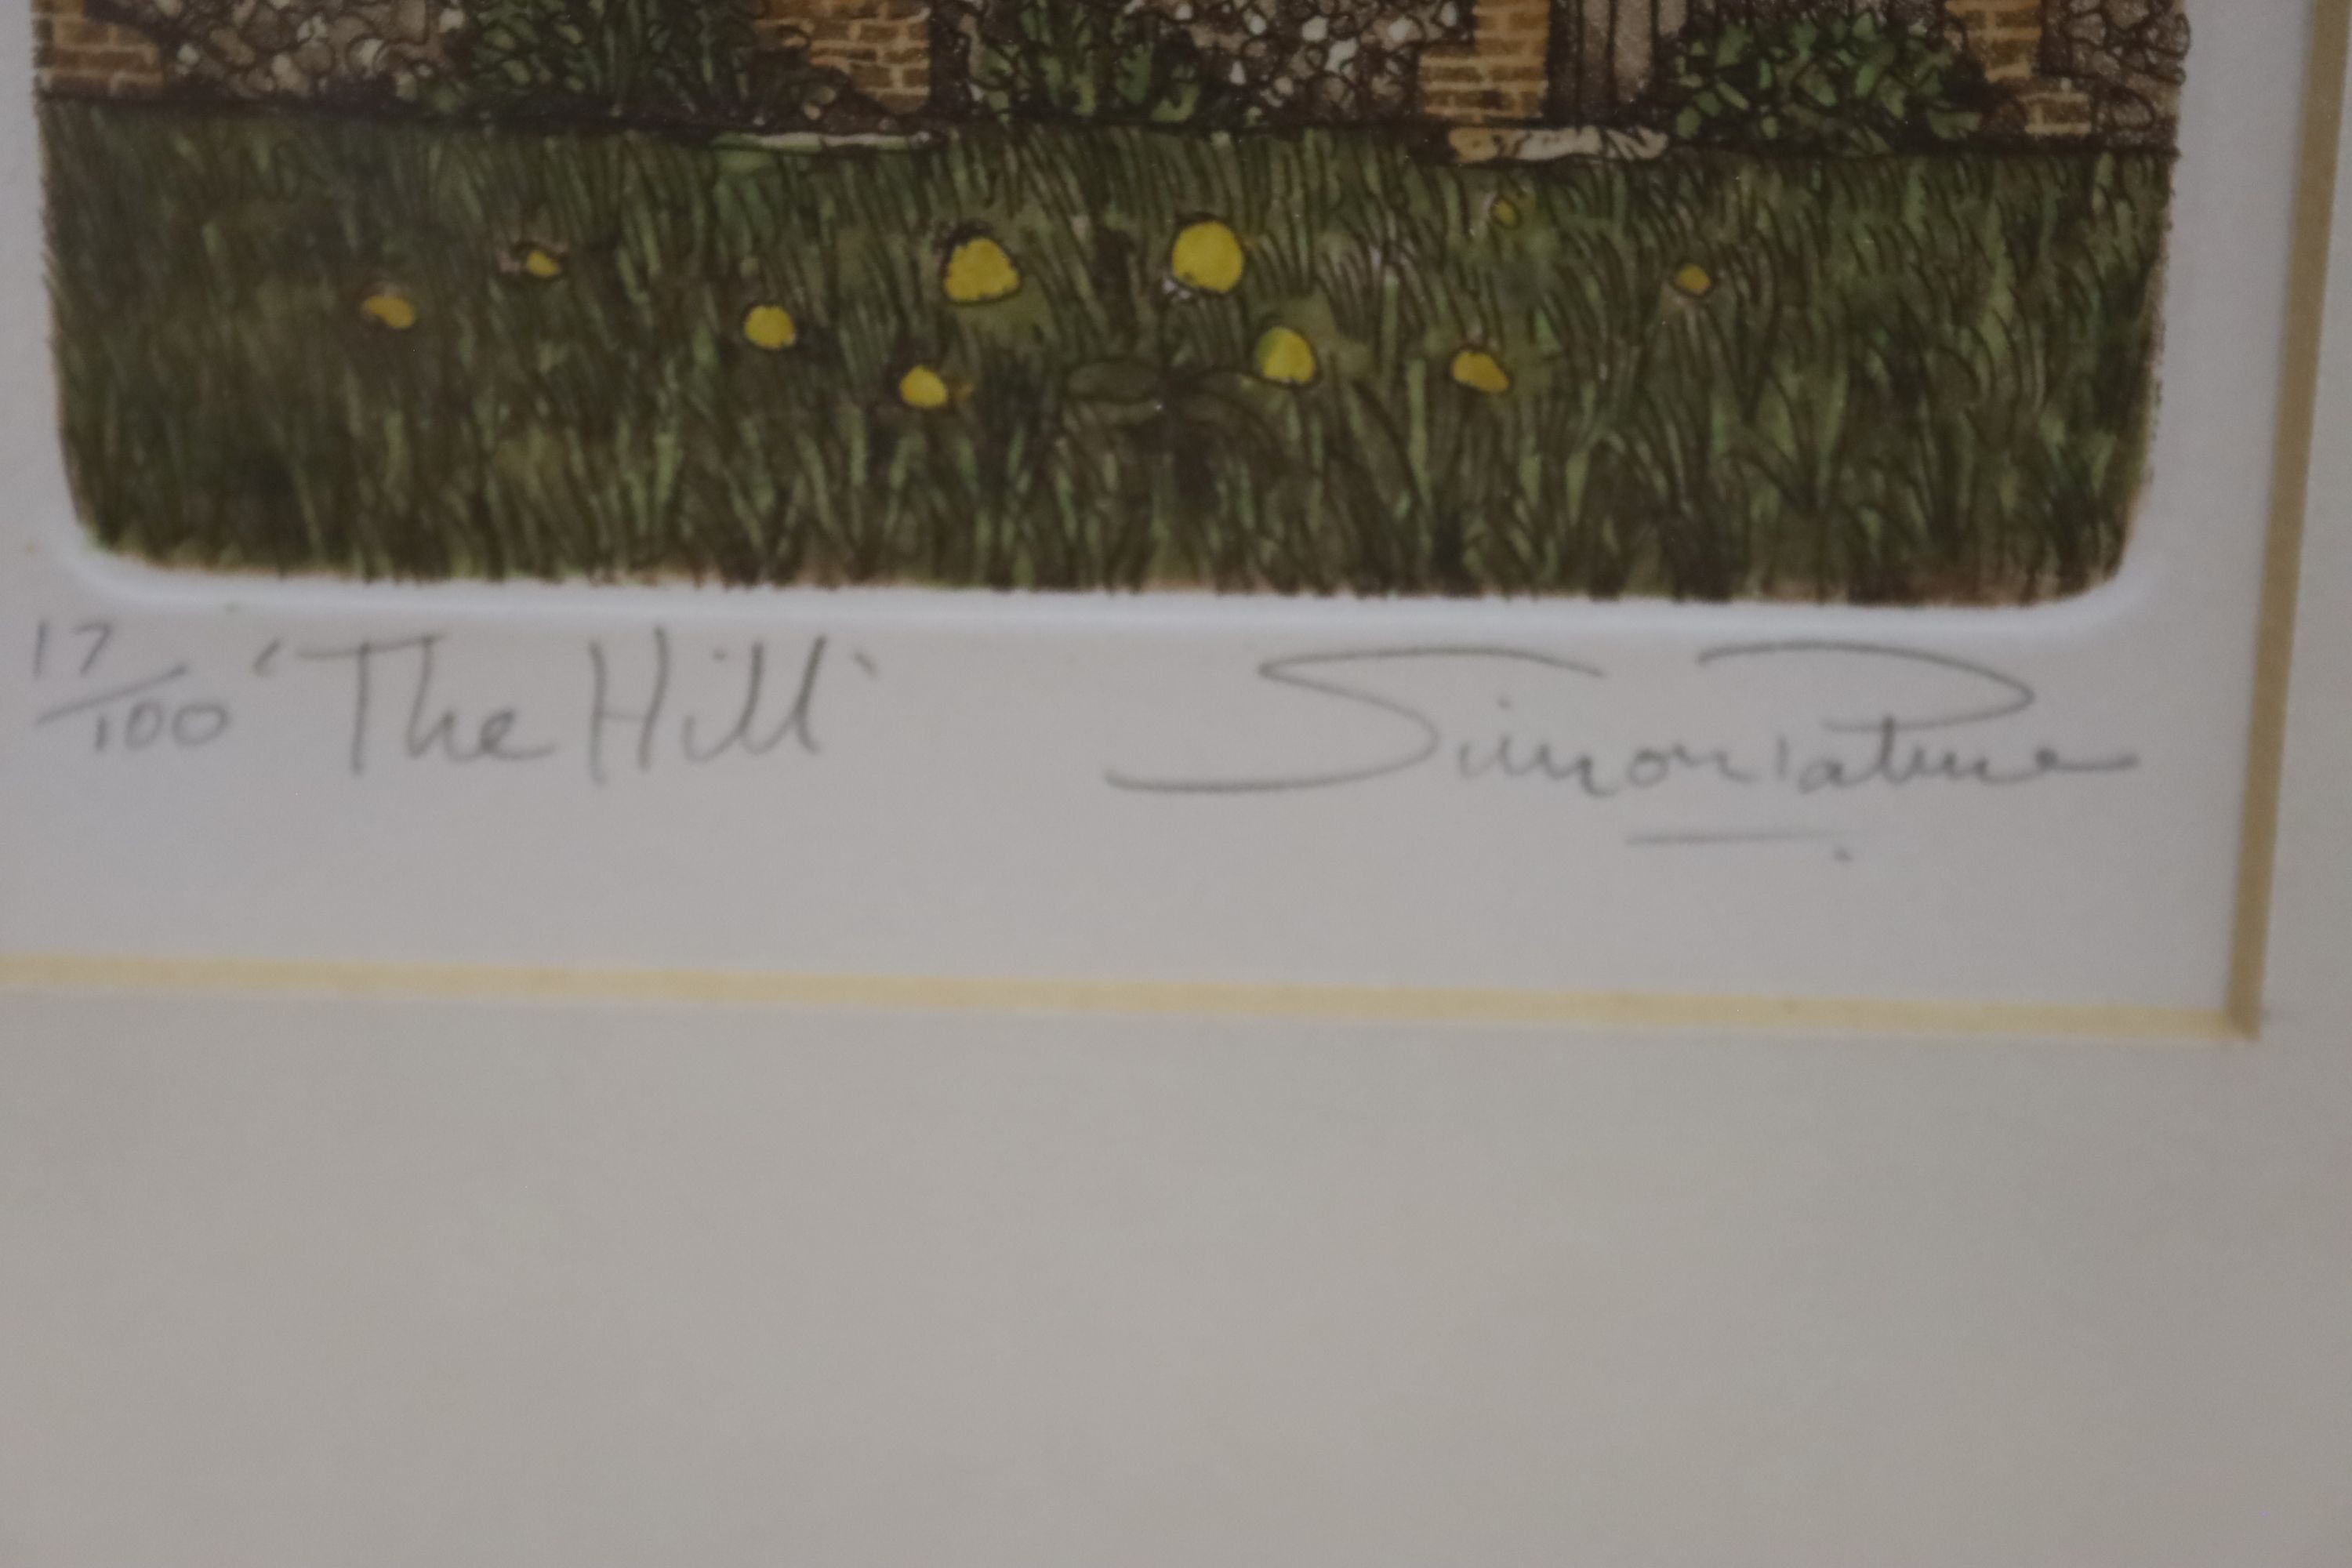 Simon Palmer, two limited edition prints, 'The Hill' and 'The Field', signed in pencil, 17/100 and 35/100, 12.5 x 11cm